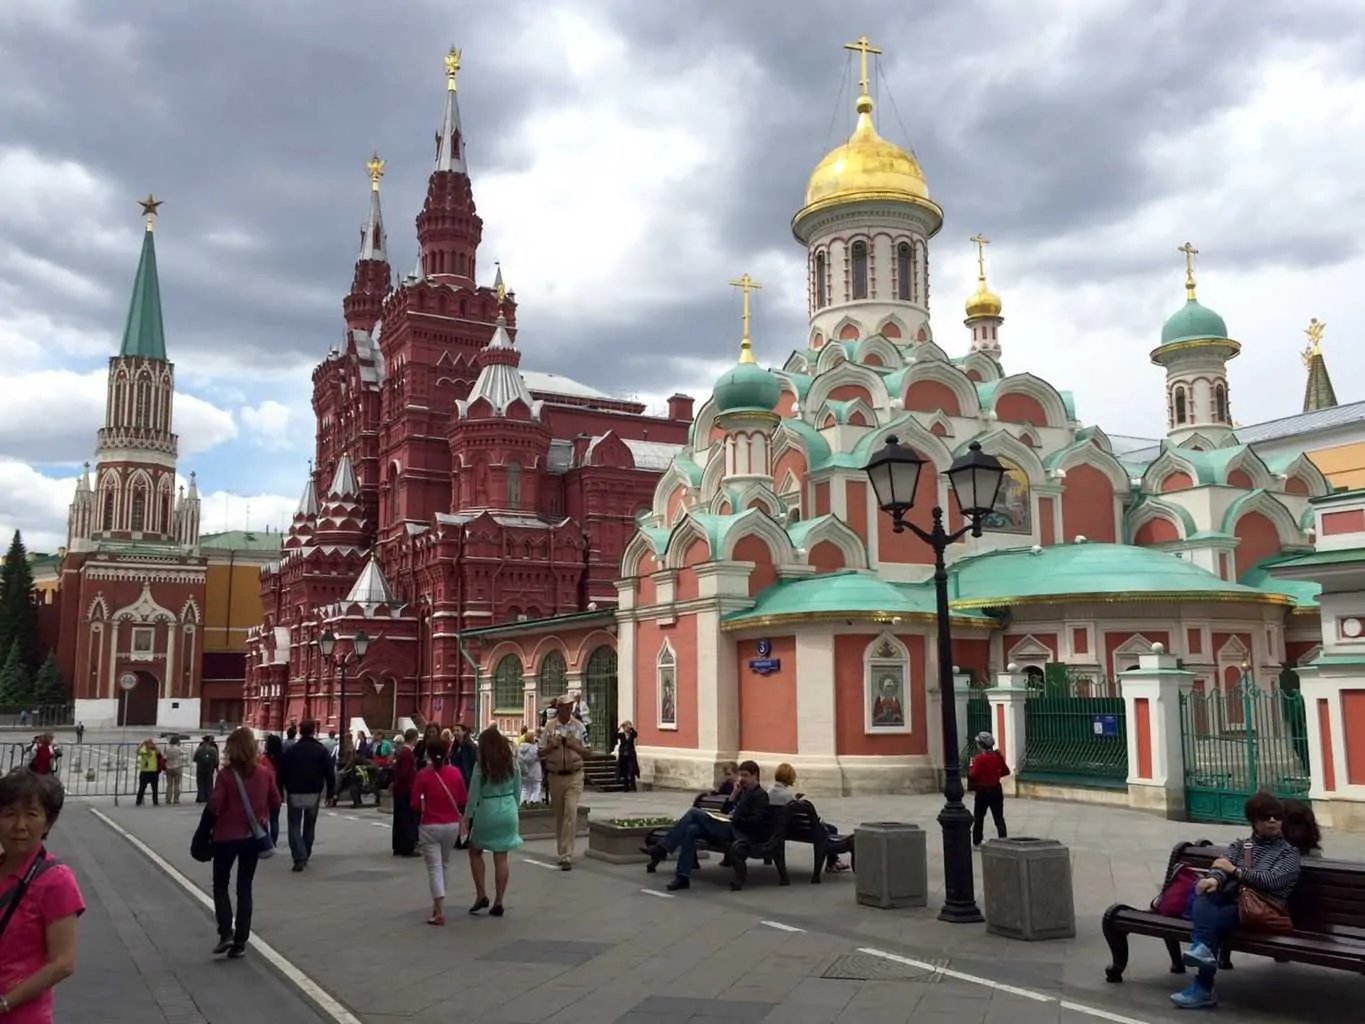 Red Square Moscow Russia with the Kremlin and church of christ the saviour. These are the places are the reason why you should go to moscow. This is a photo of people walking towards two great moscow tourist attractions